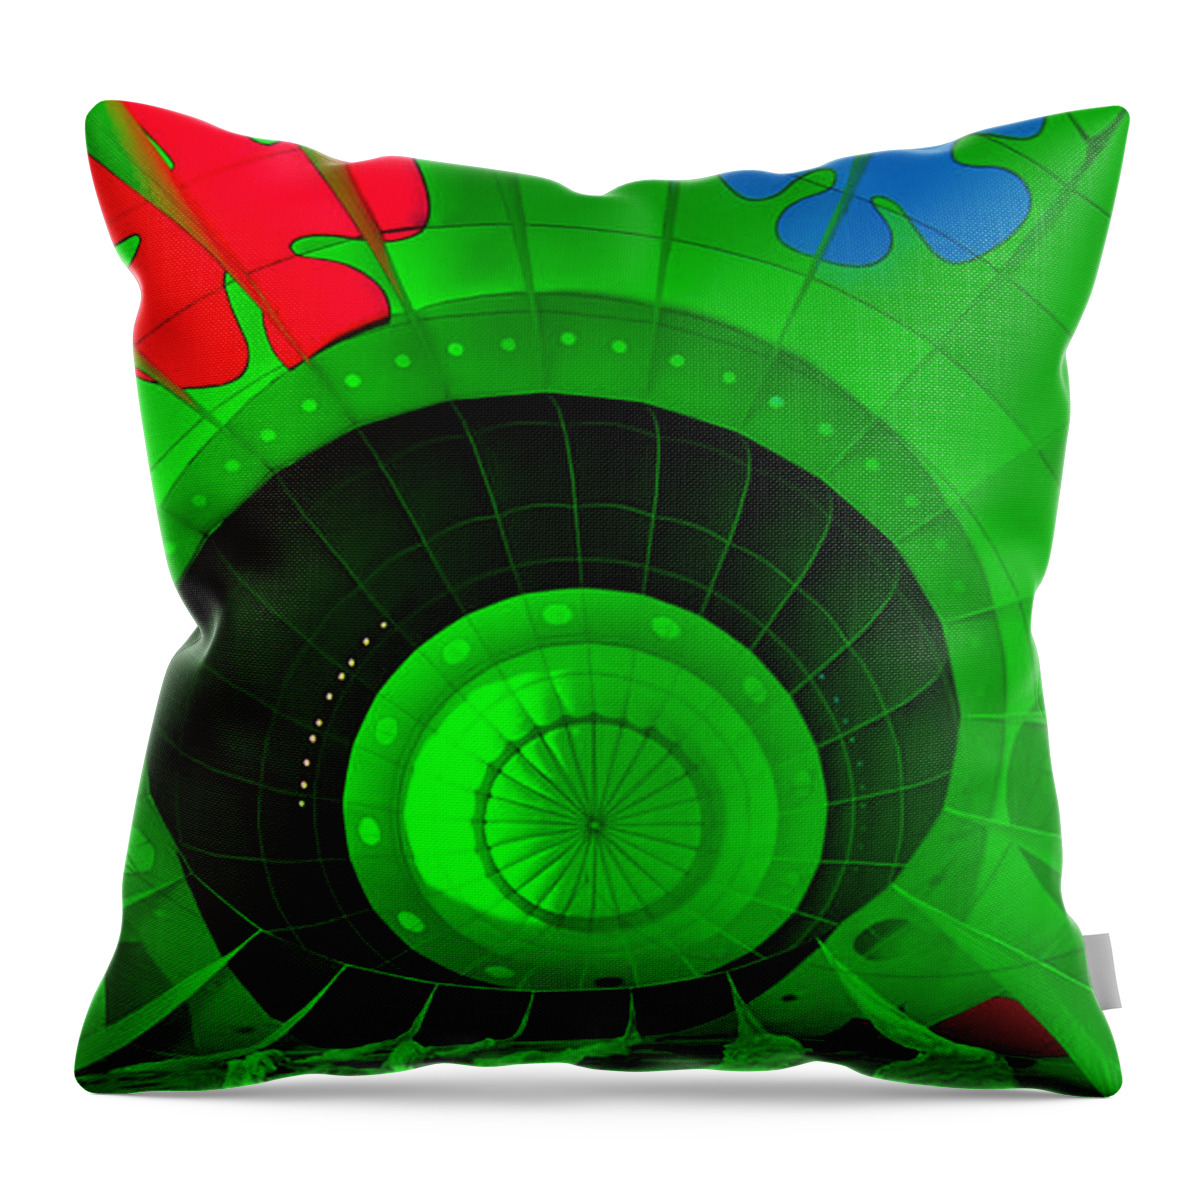 Balloon Throw Pillow featuring the photograph Inside The Green Balloon by Tom Gresham